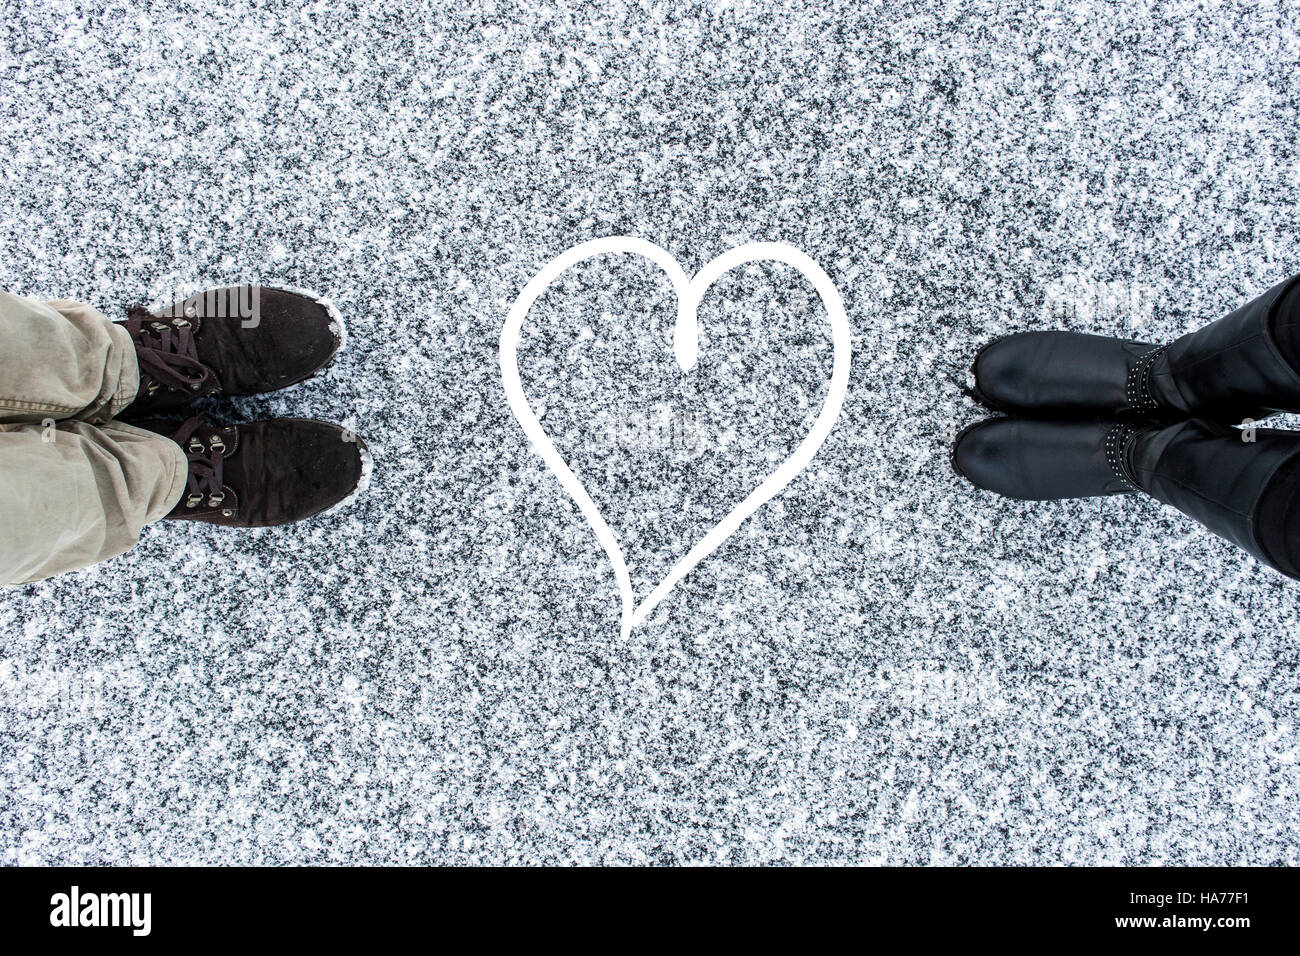 Male and Female boots standing at heart symbol on asphalt covered gritty snow surface. Rough snowy. Cold Winter. Top view. Relations concept. Stock Photo